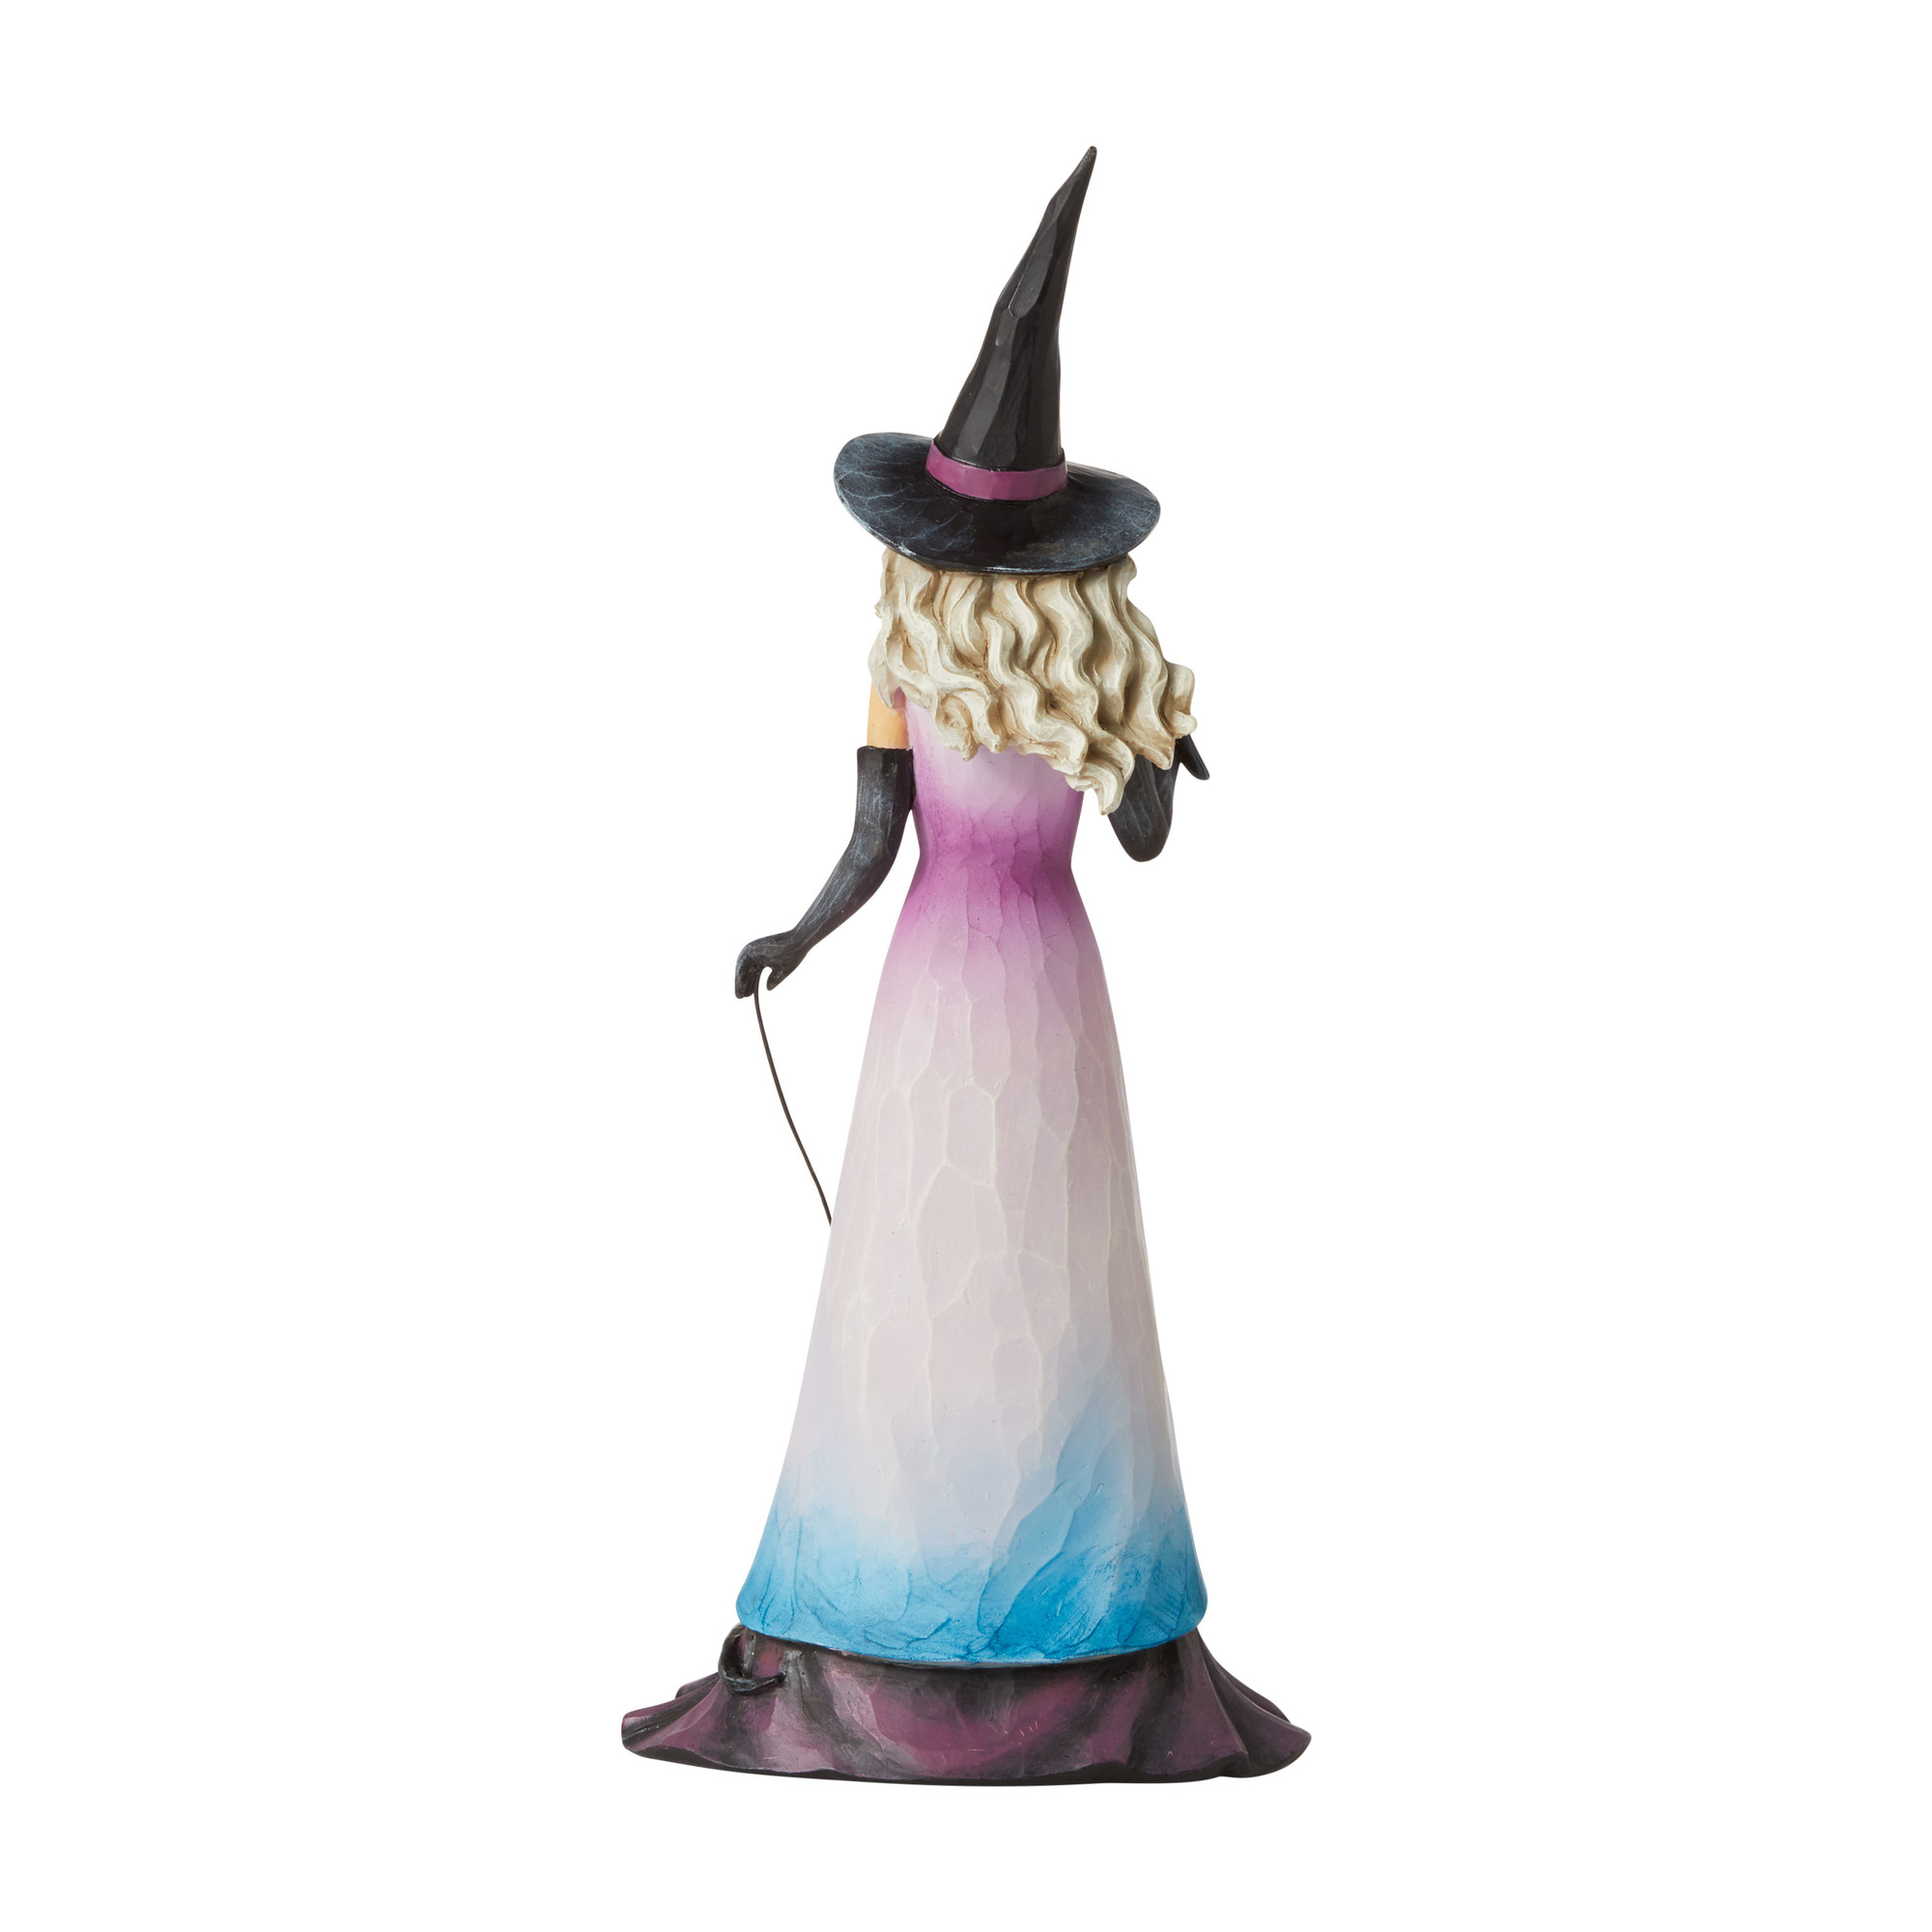 Enesco Jim Shore Heartwood Creek Witch with Spider Web Skirt NIB 6006699 